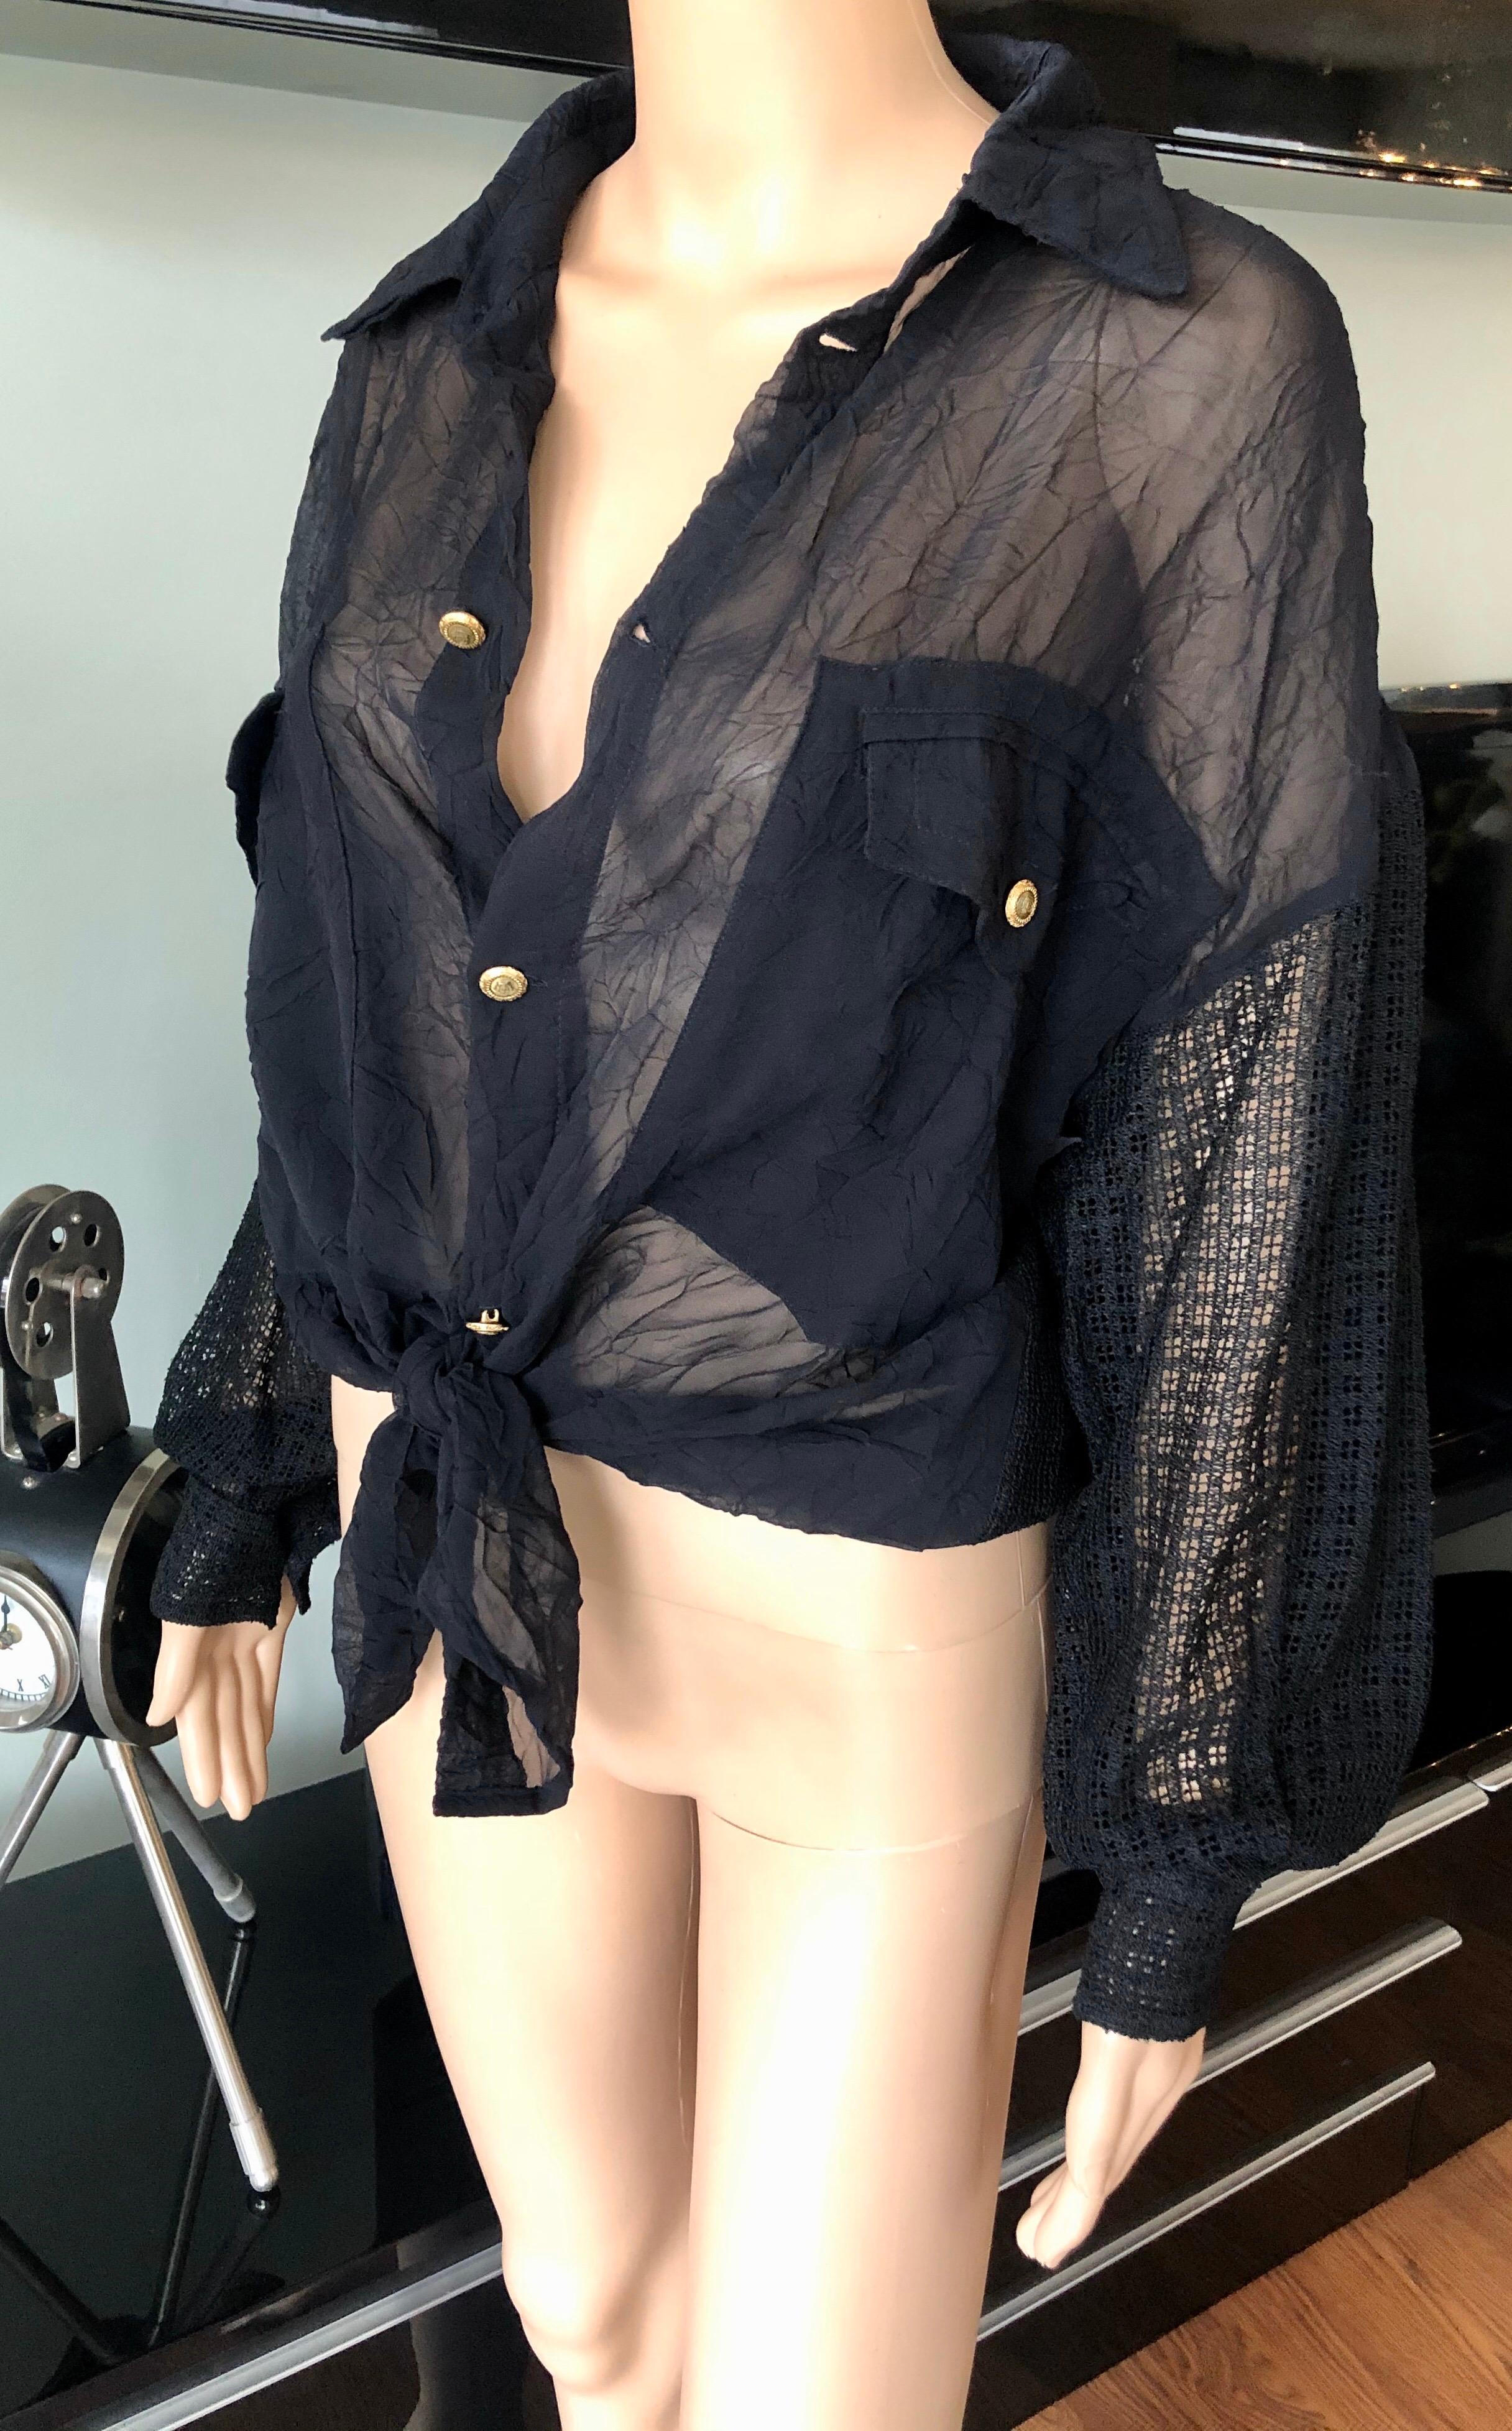 Gianni Versace c. 1990 Vintage Sheer Silk Mesh Black Shirt Blouse Top

Gianni Versace black silk button up shirt featuring long sleeves and button closure at front.
Please note size tag has faded as seen on the last photo.
Please see the approximate